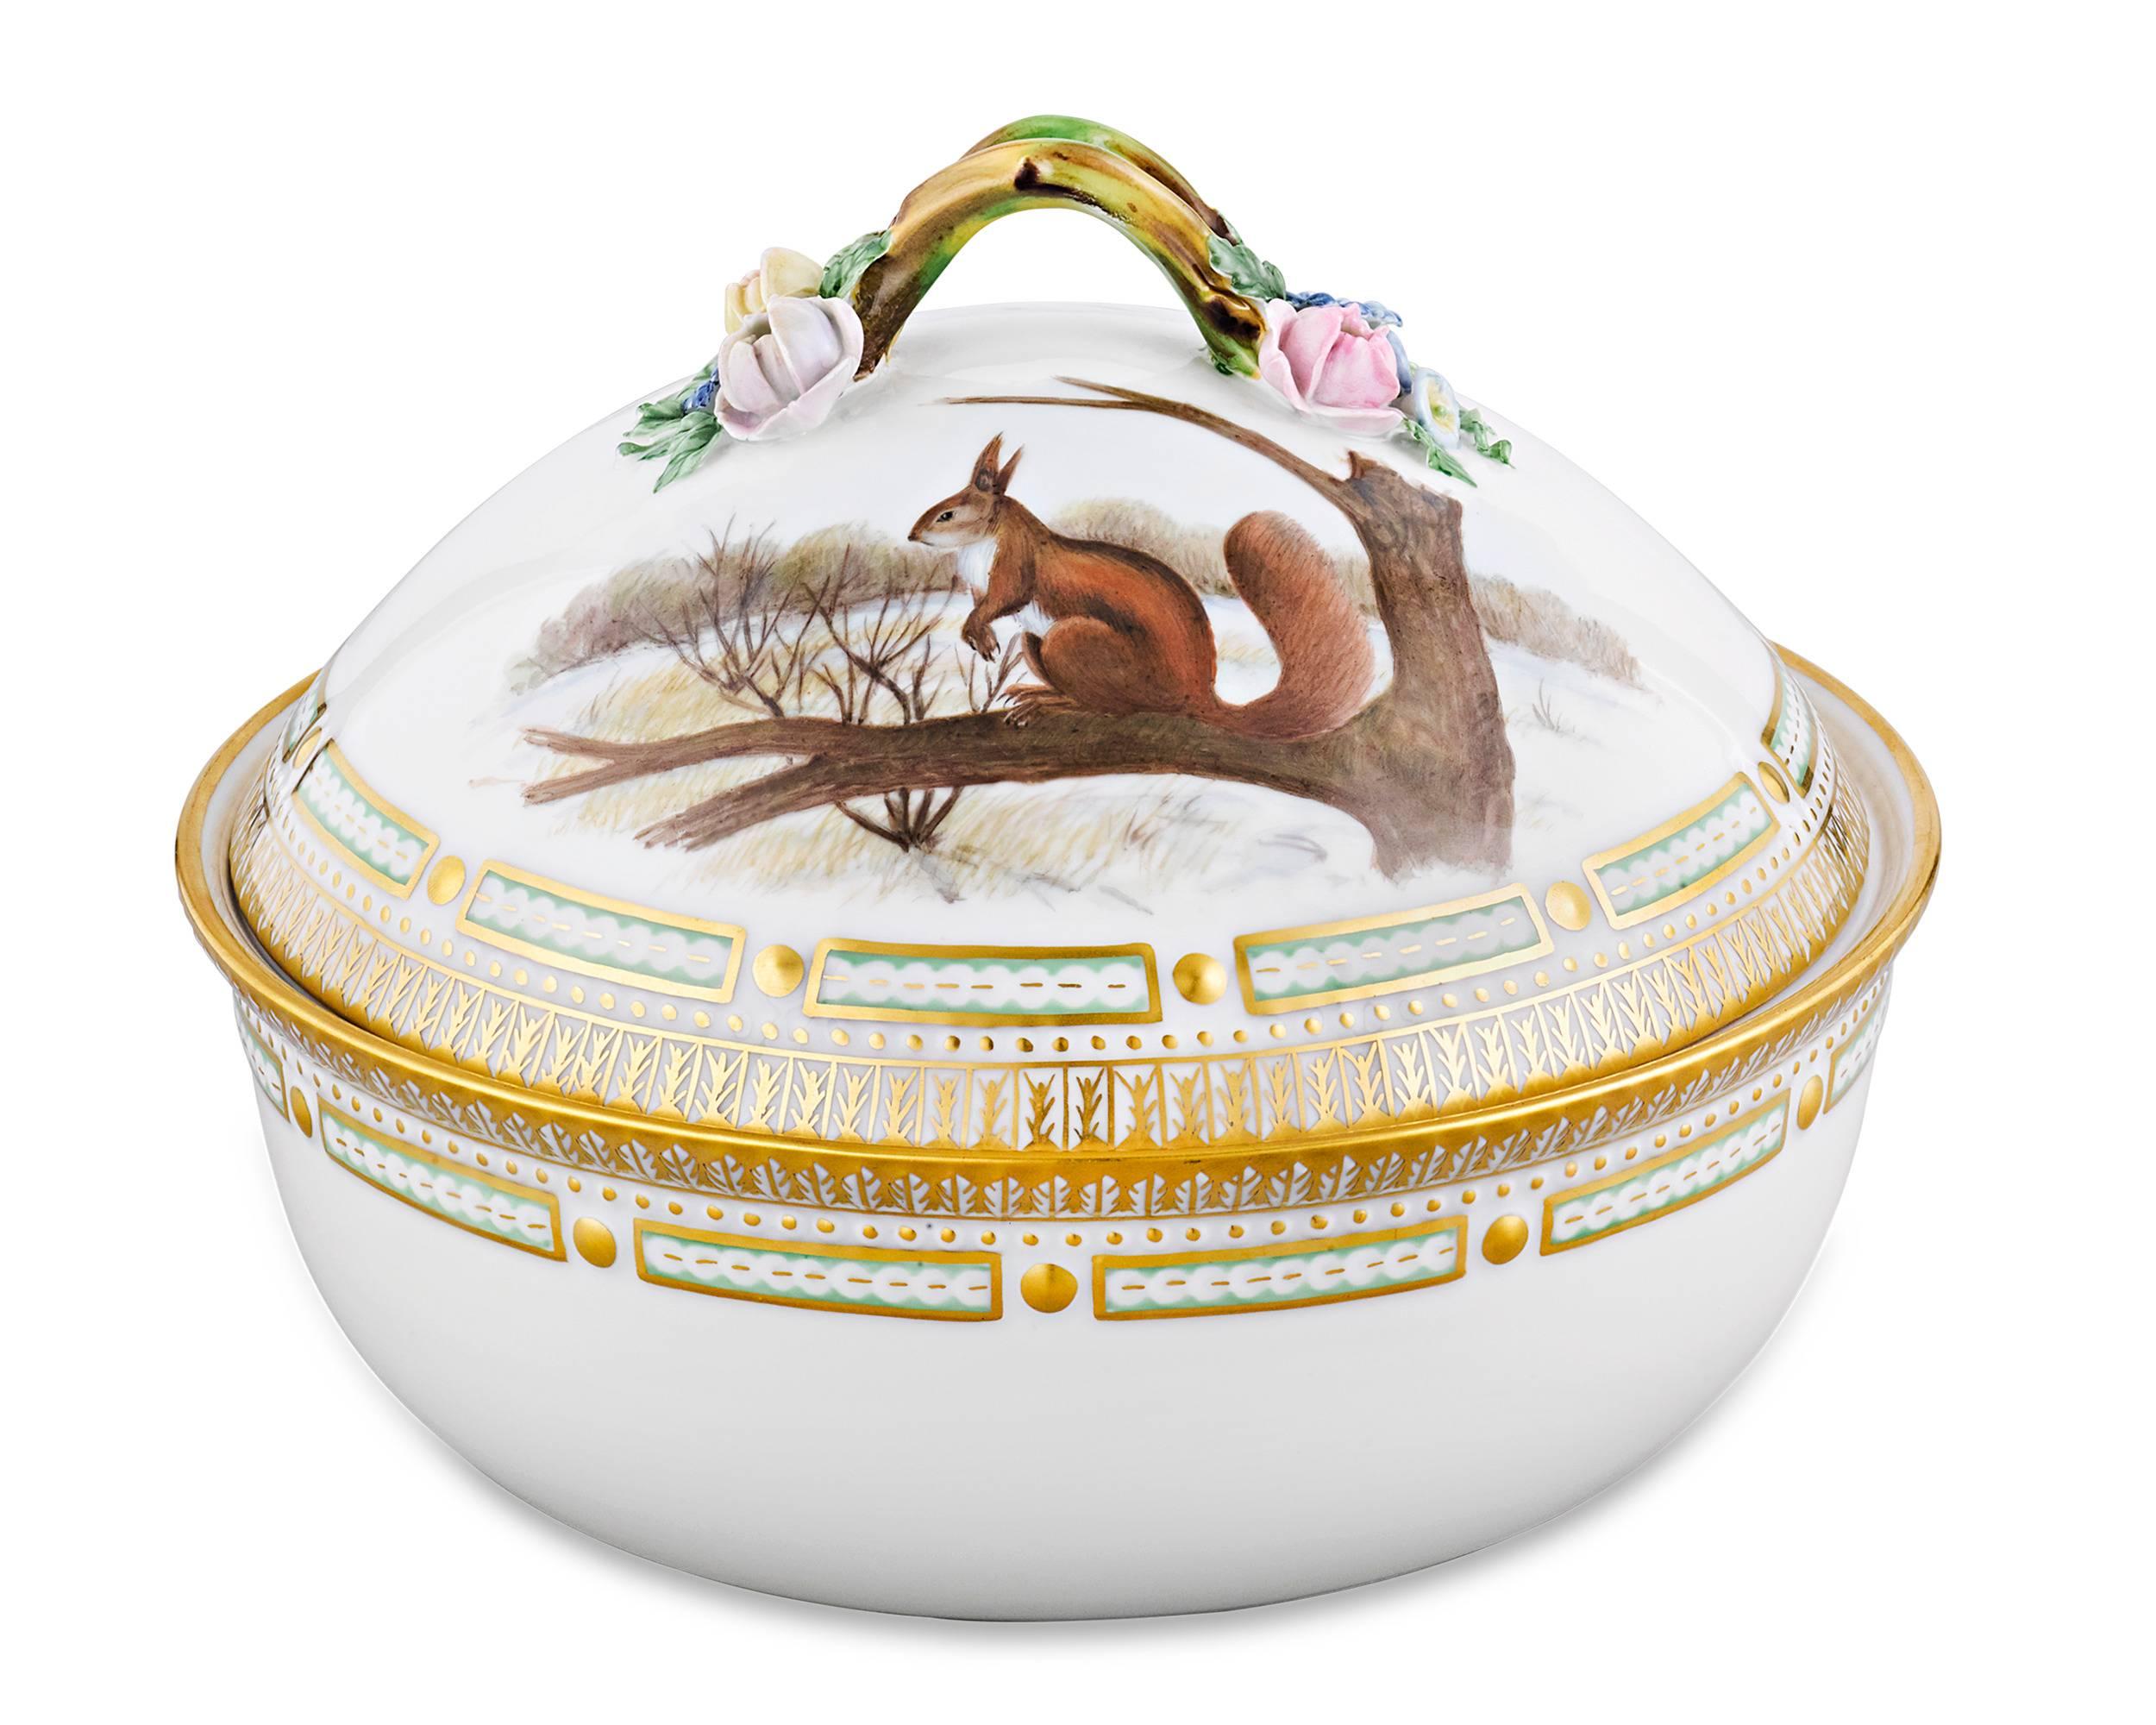 This covered porcelain vegetable dish is part of the exceptionally rare Flora Danica Game Series by the renowned Royal Copenhagen. Flora Danica is known worldwide for its intricate and highly detailed illustrations of the native flowers of Denmark.